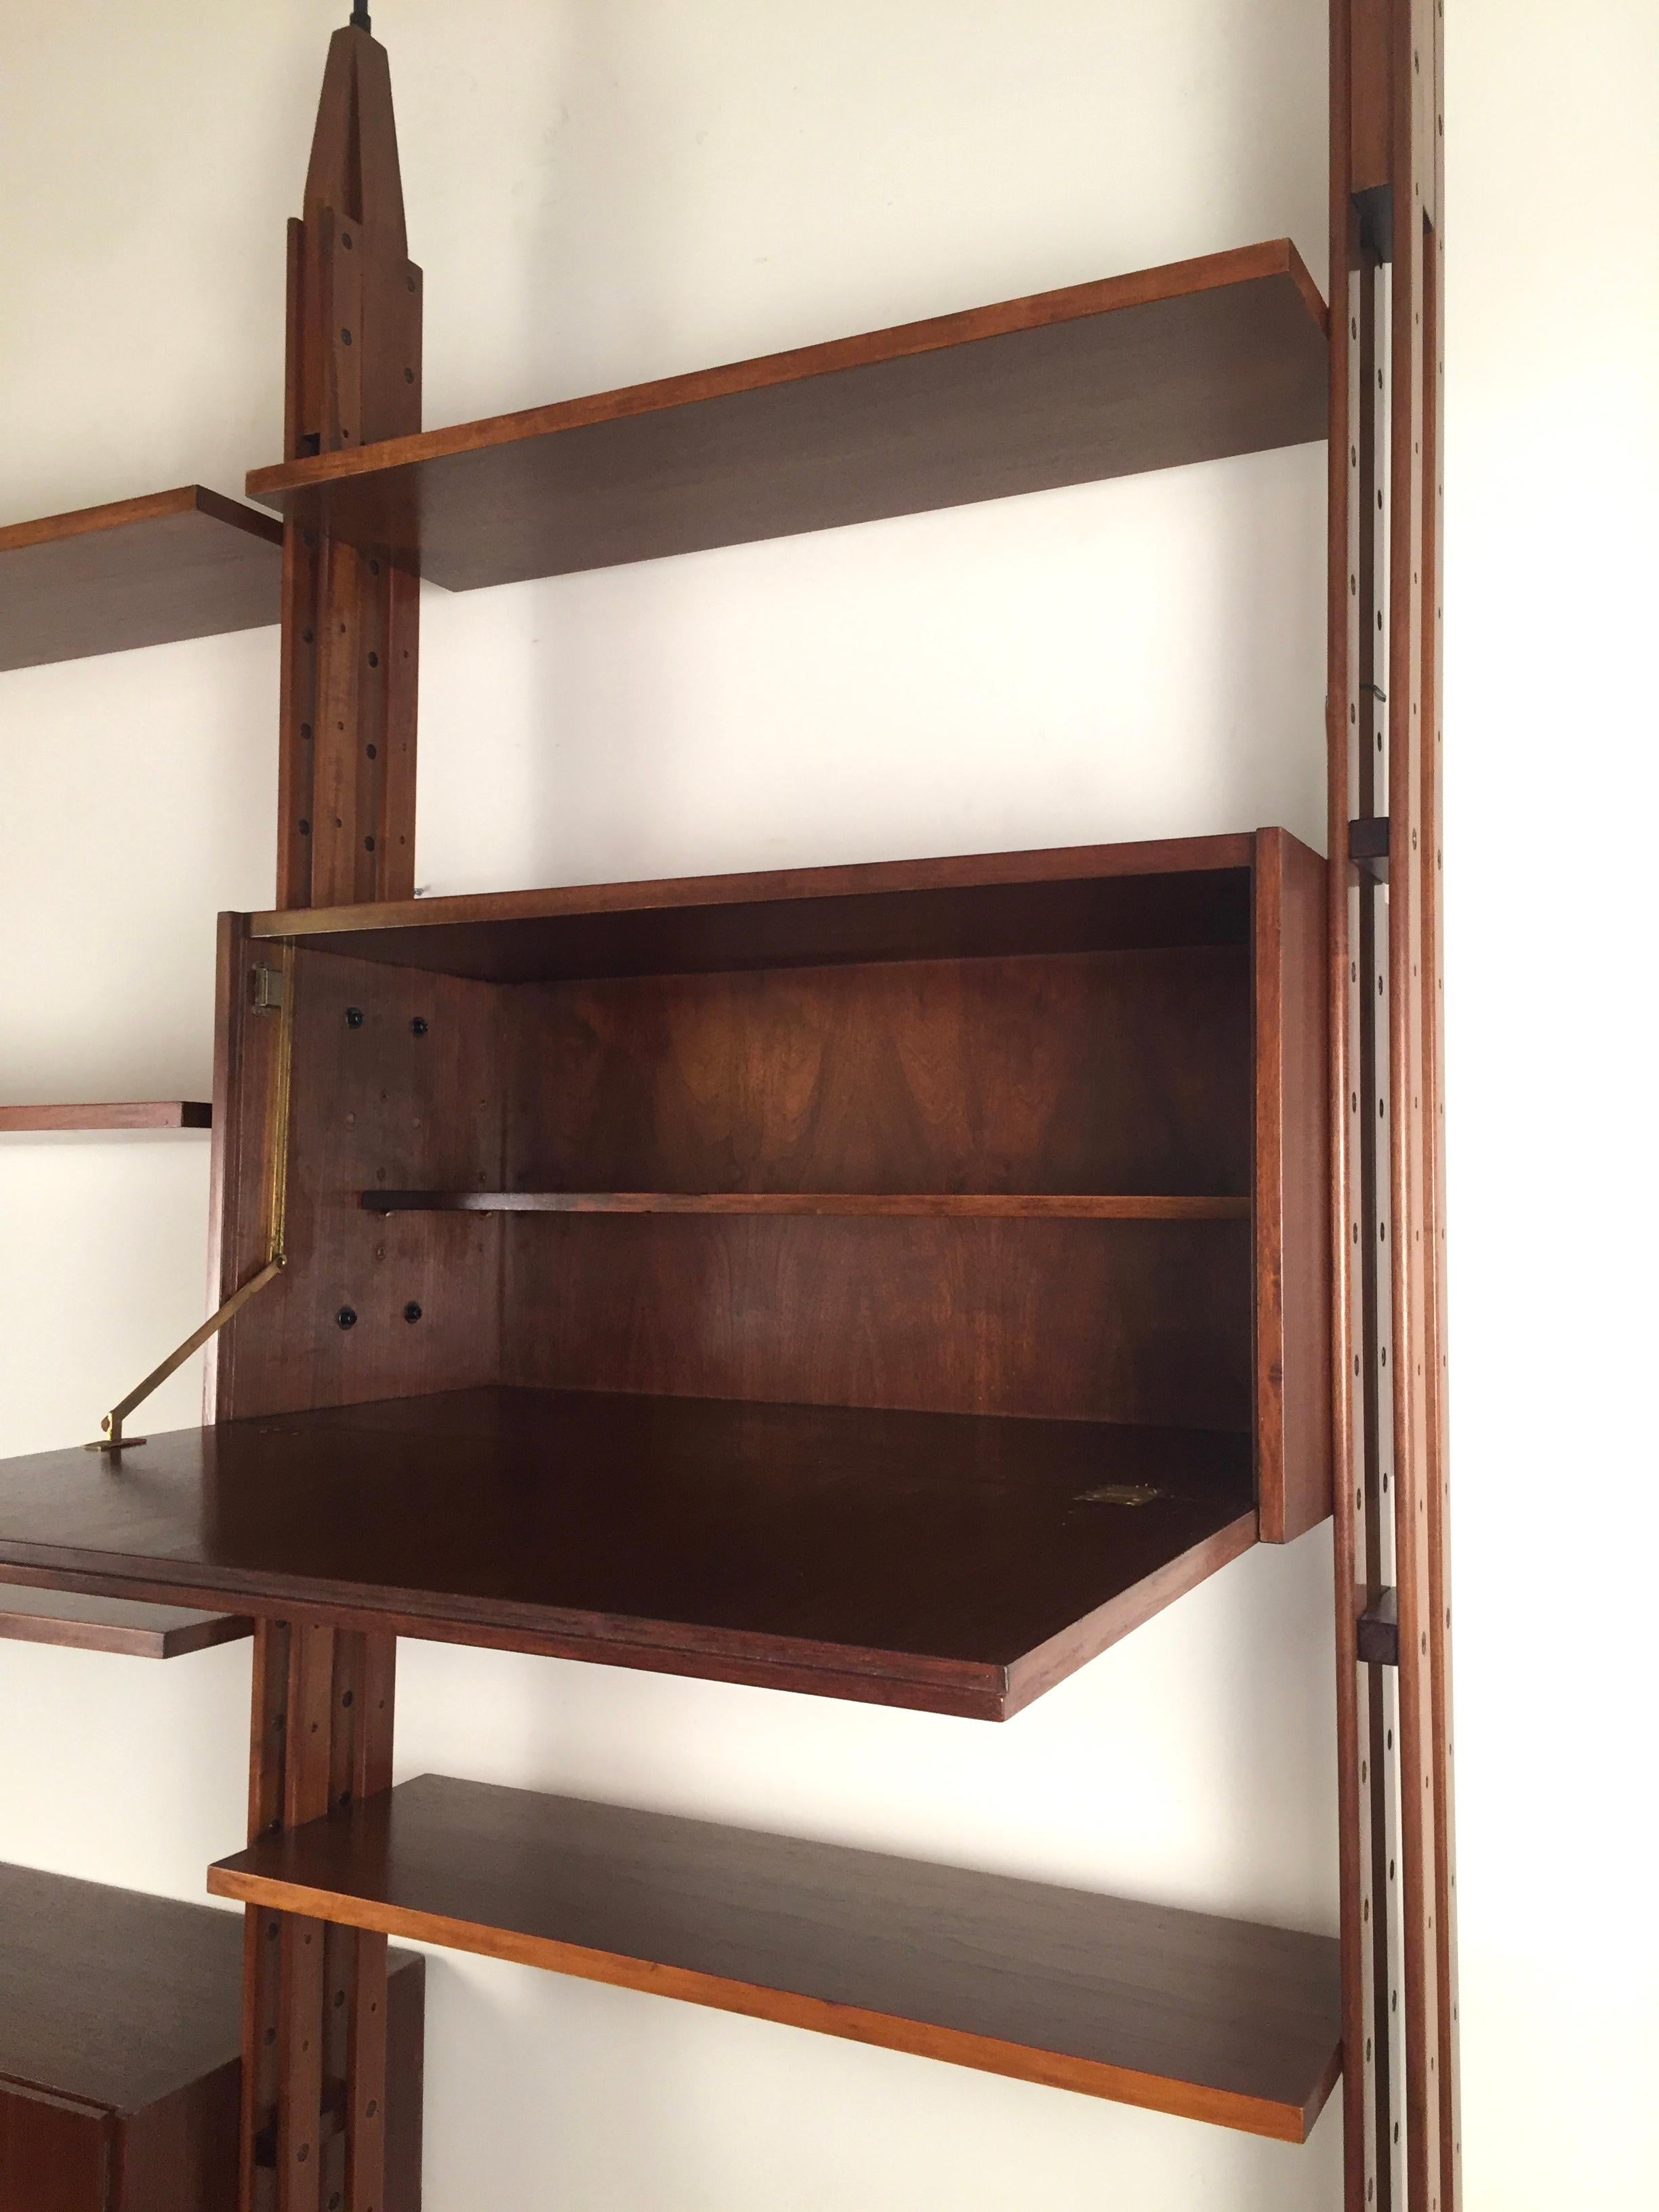 A two modular teak bookcase, Designed by Franco Albini and edited in 1956 by Poggi, Pavia, Marked. Composed of two modules with storages units and shelves. Black laquered metal ends,
Measures: Minimum height:267 cm. Maximum height : 273